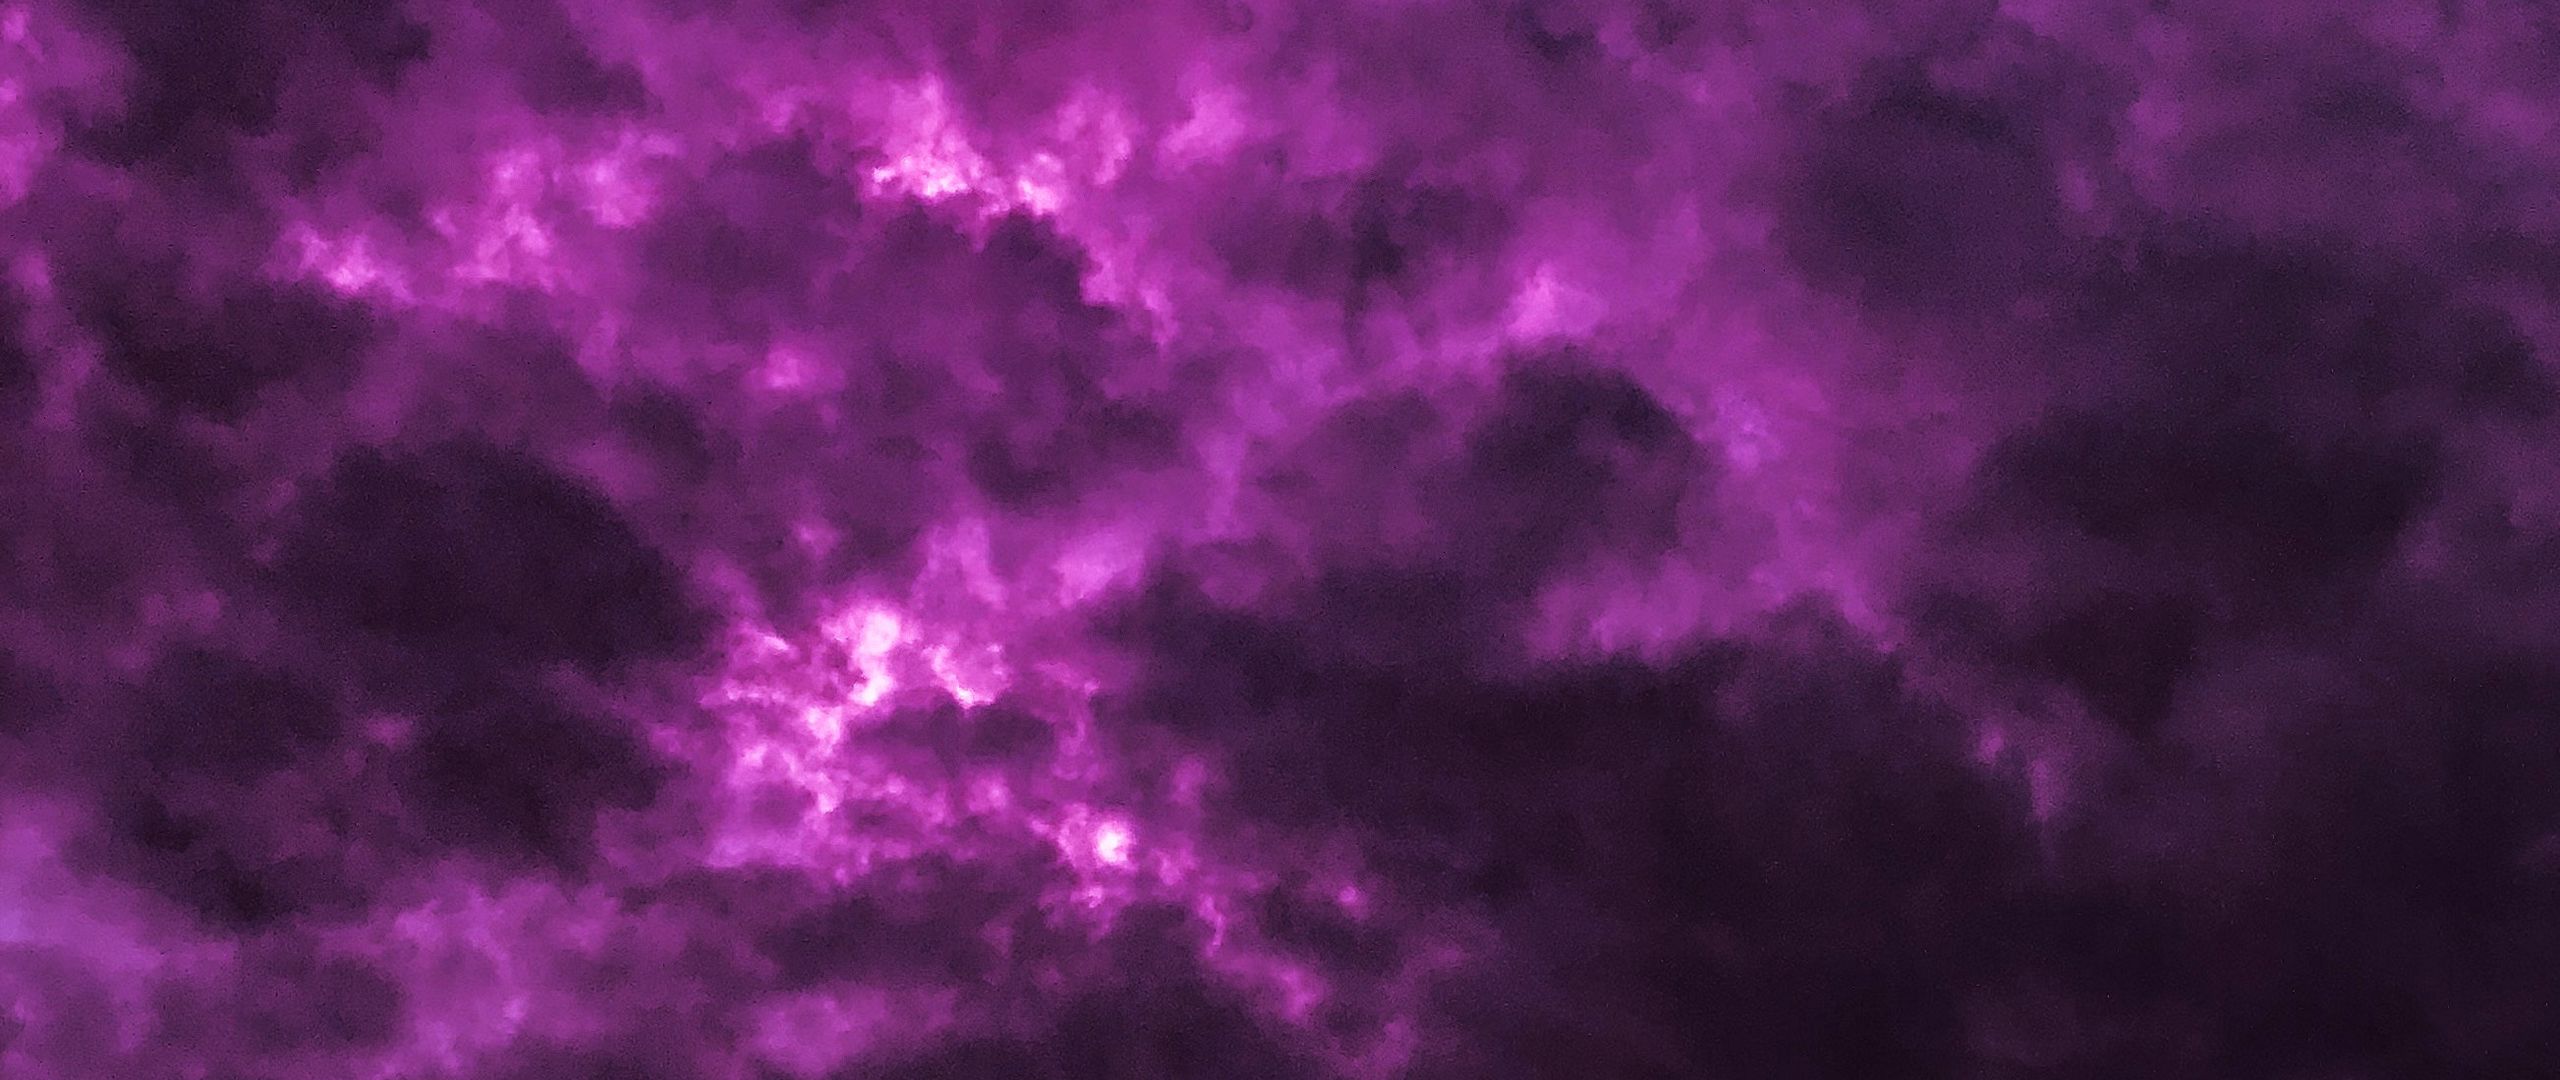 Download wallpaper 2560x1080 clouds, sky, purple, thick, dark dual wide  1080p hd background